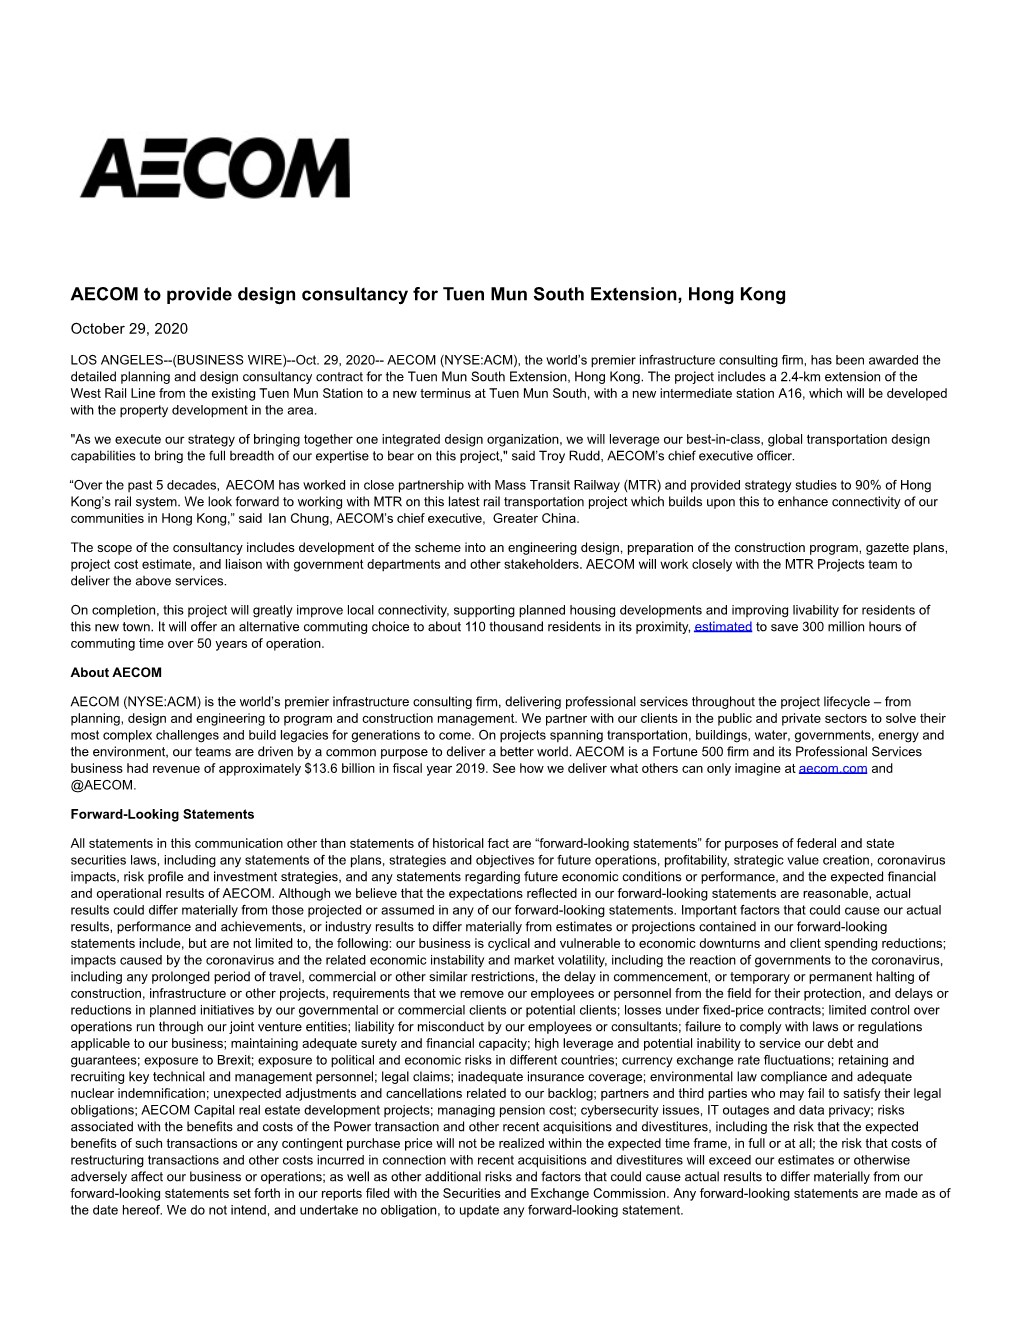 AECOM to Provide Design Consultancy for Tuen Mun South Extension, Hong Kong